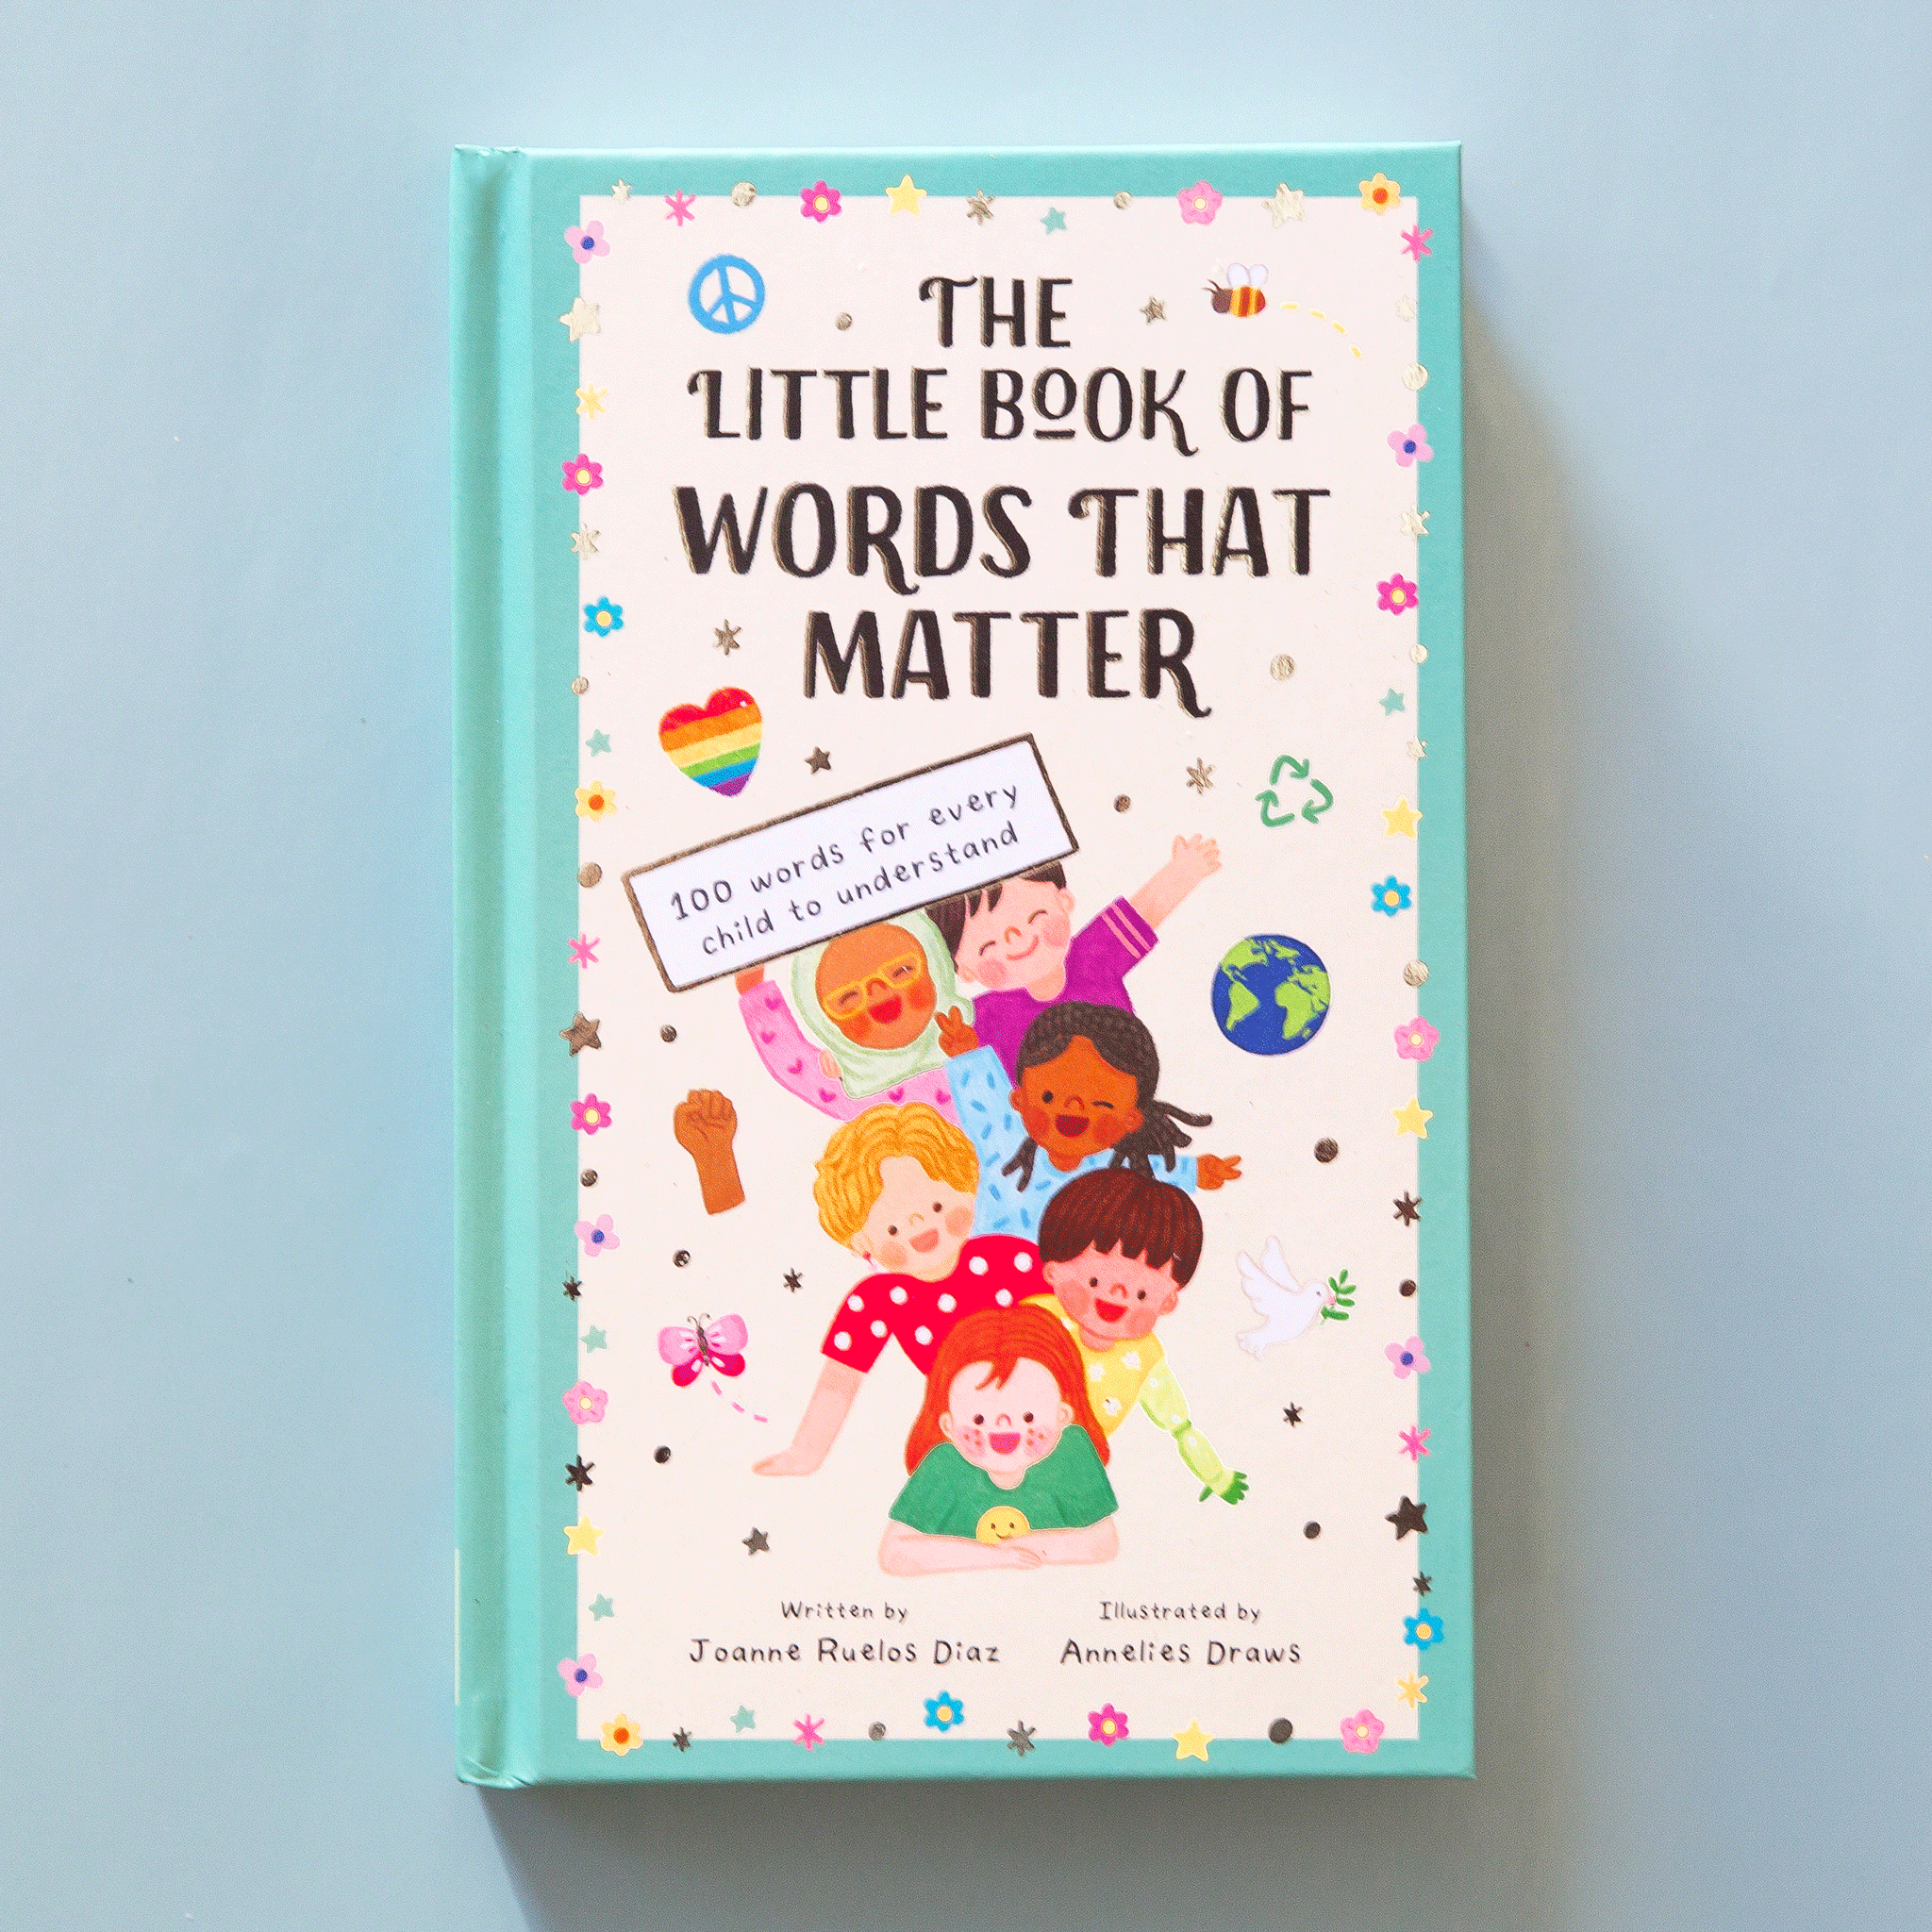 On a blue background is a book with an illustration of children and the title at the top that reads, "The Little Book of Words That Matter".